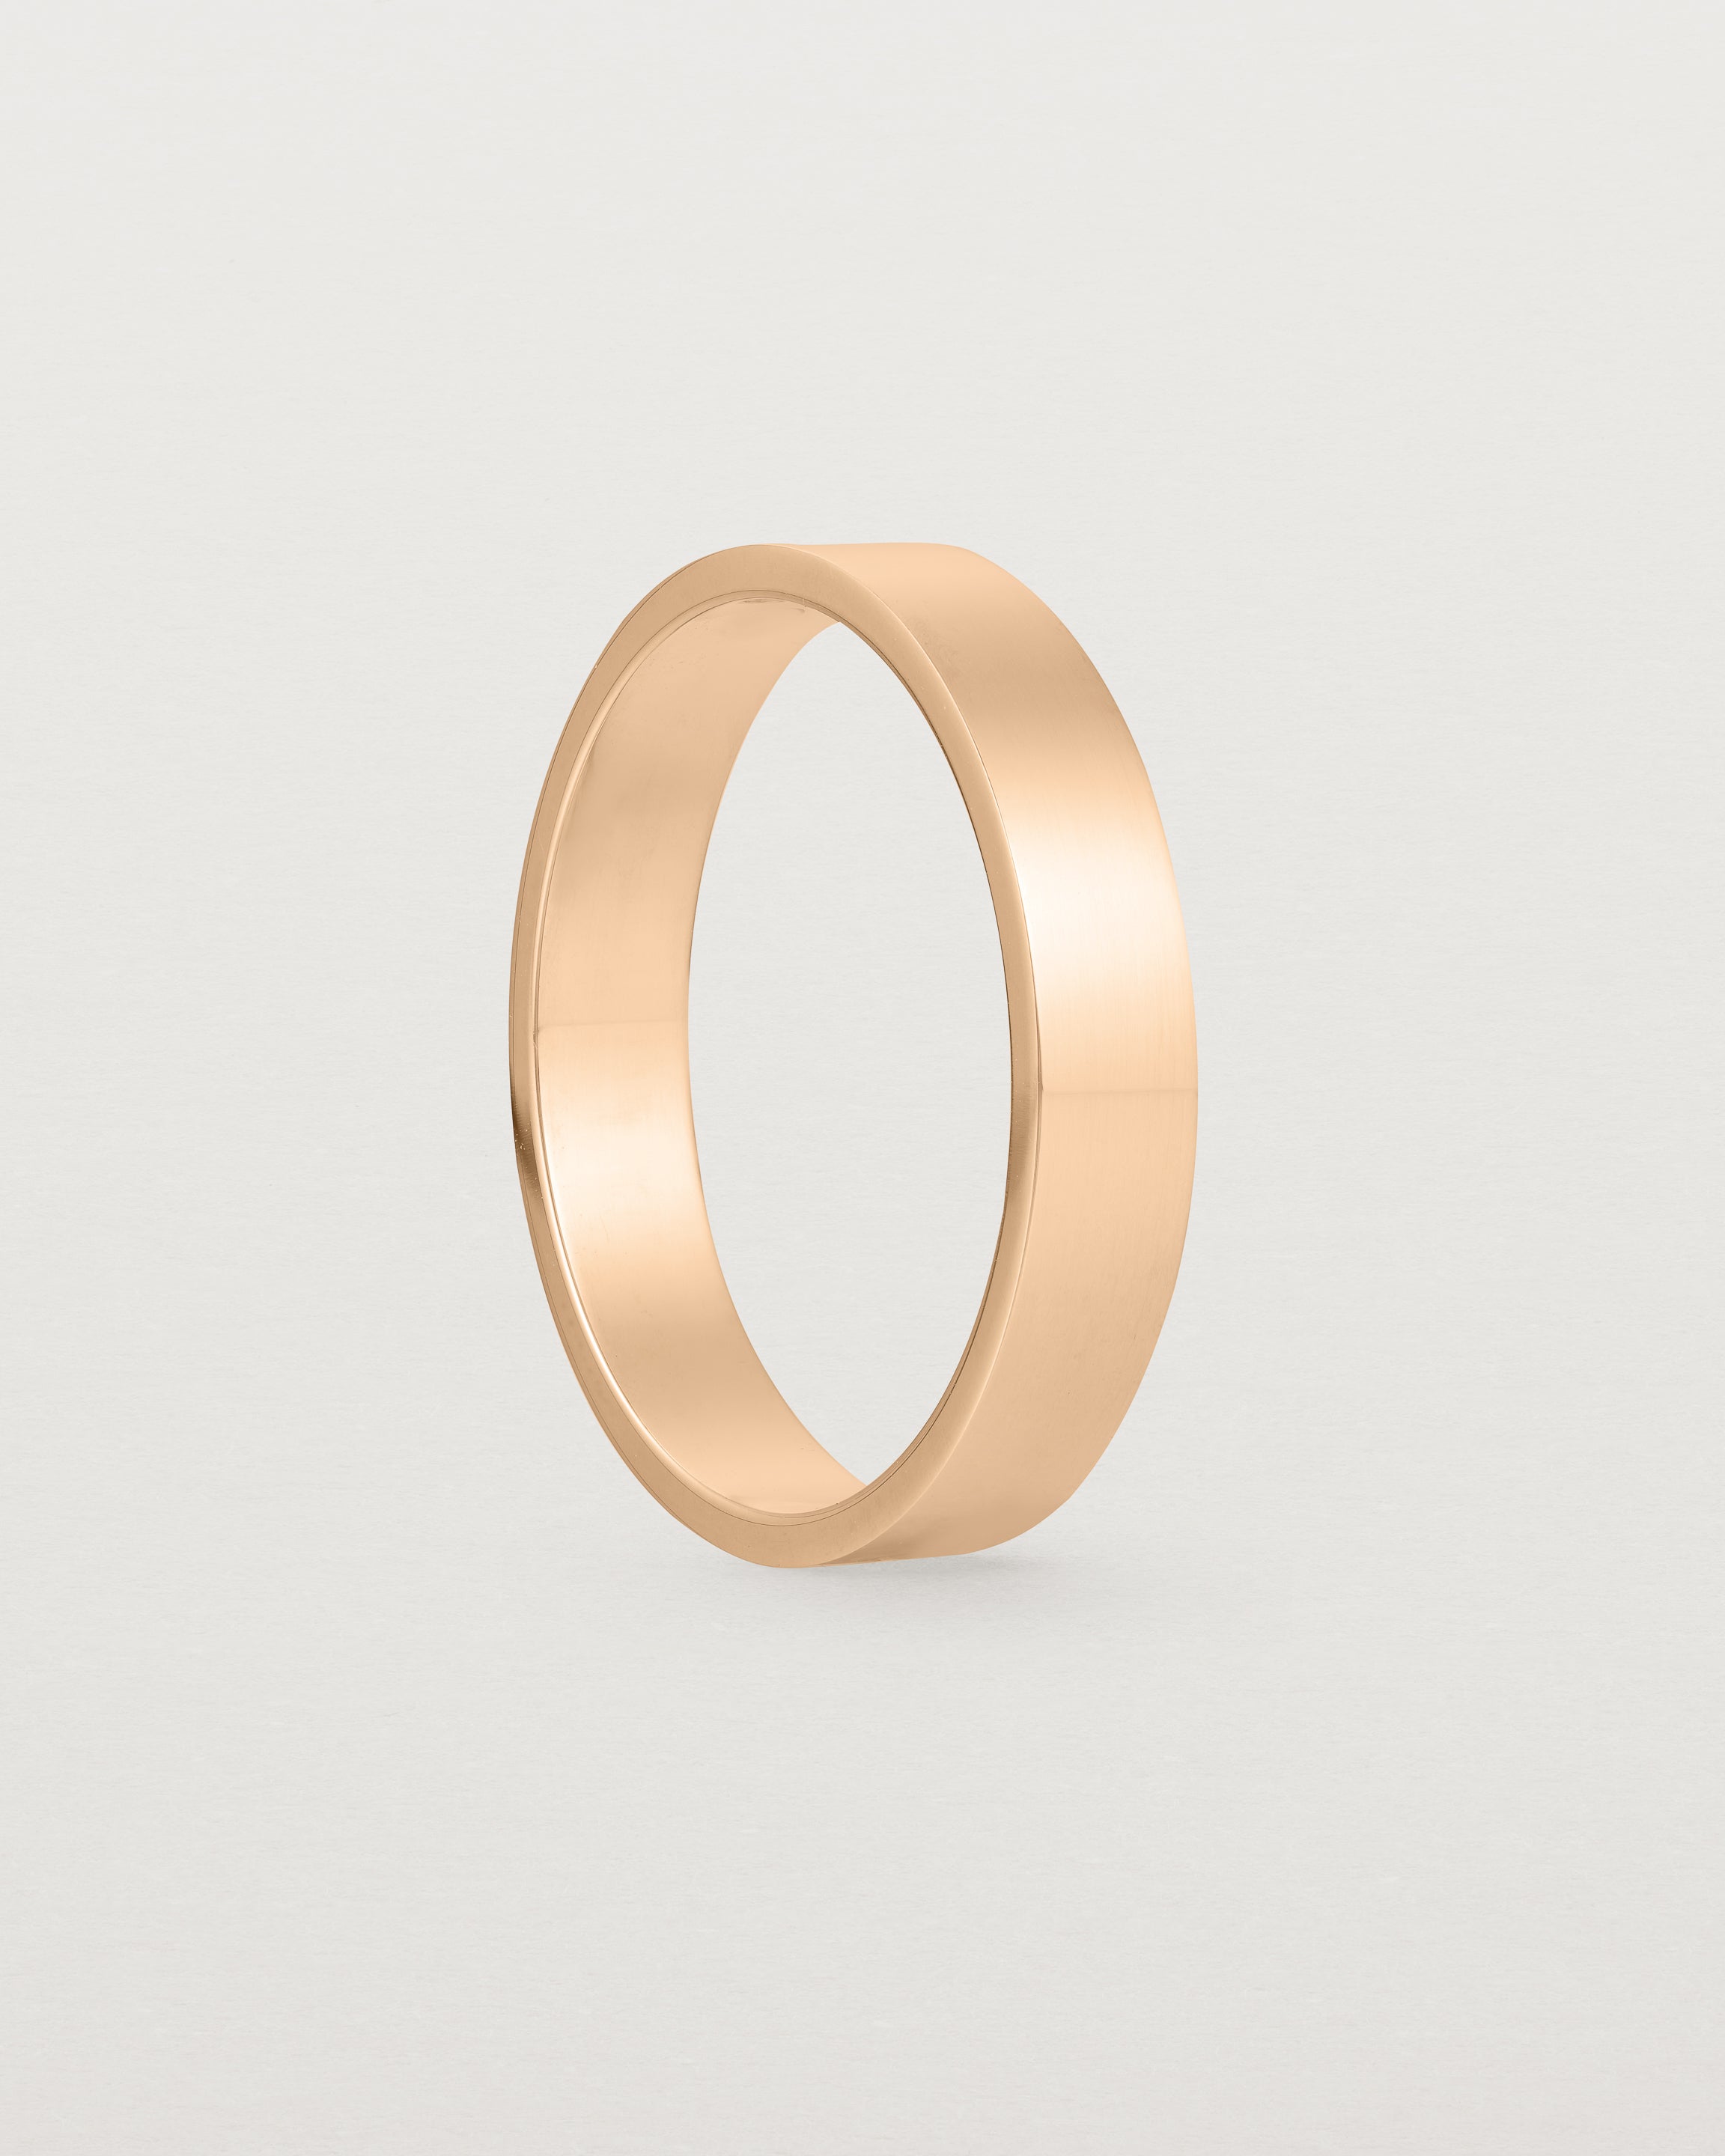 The side profile of our square, flat 4mm profile wedding band crafted in rose gold